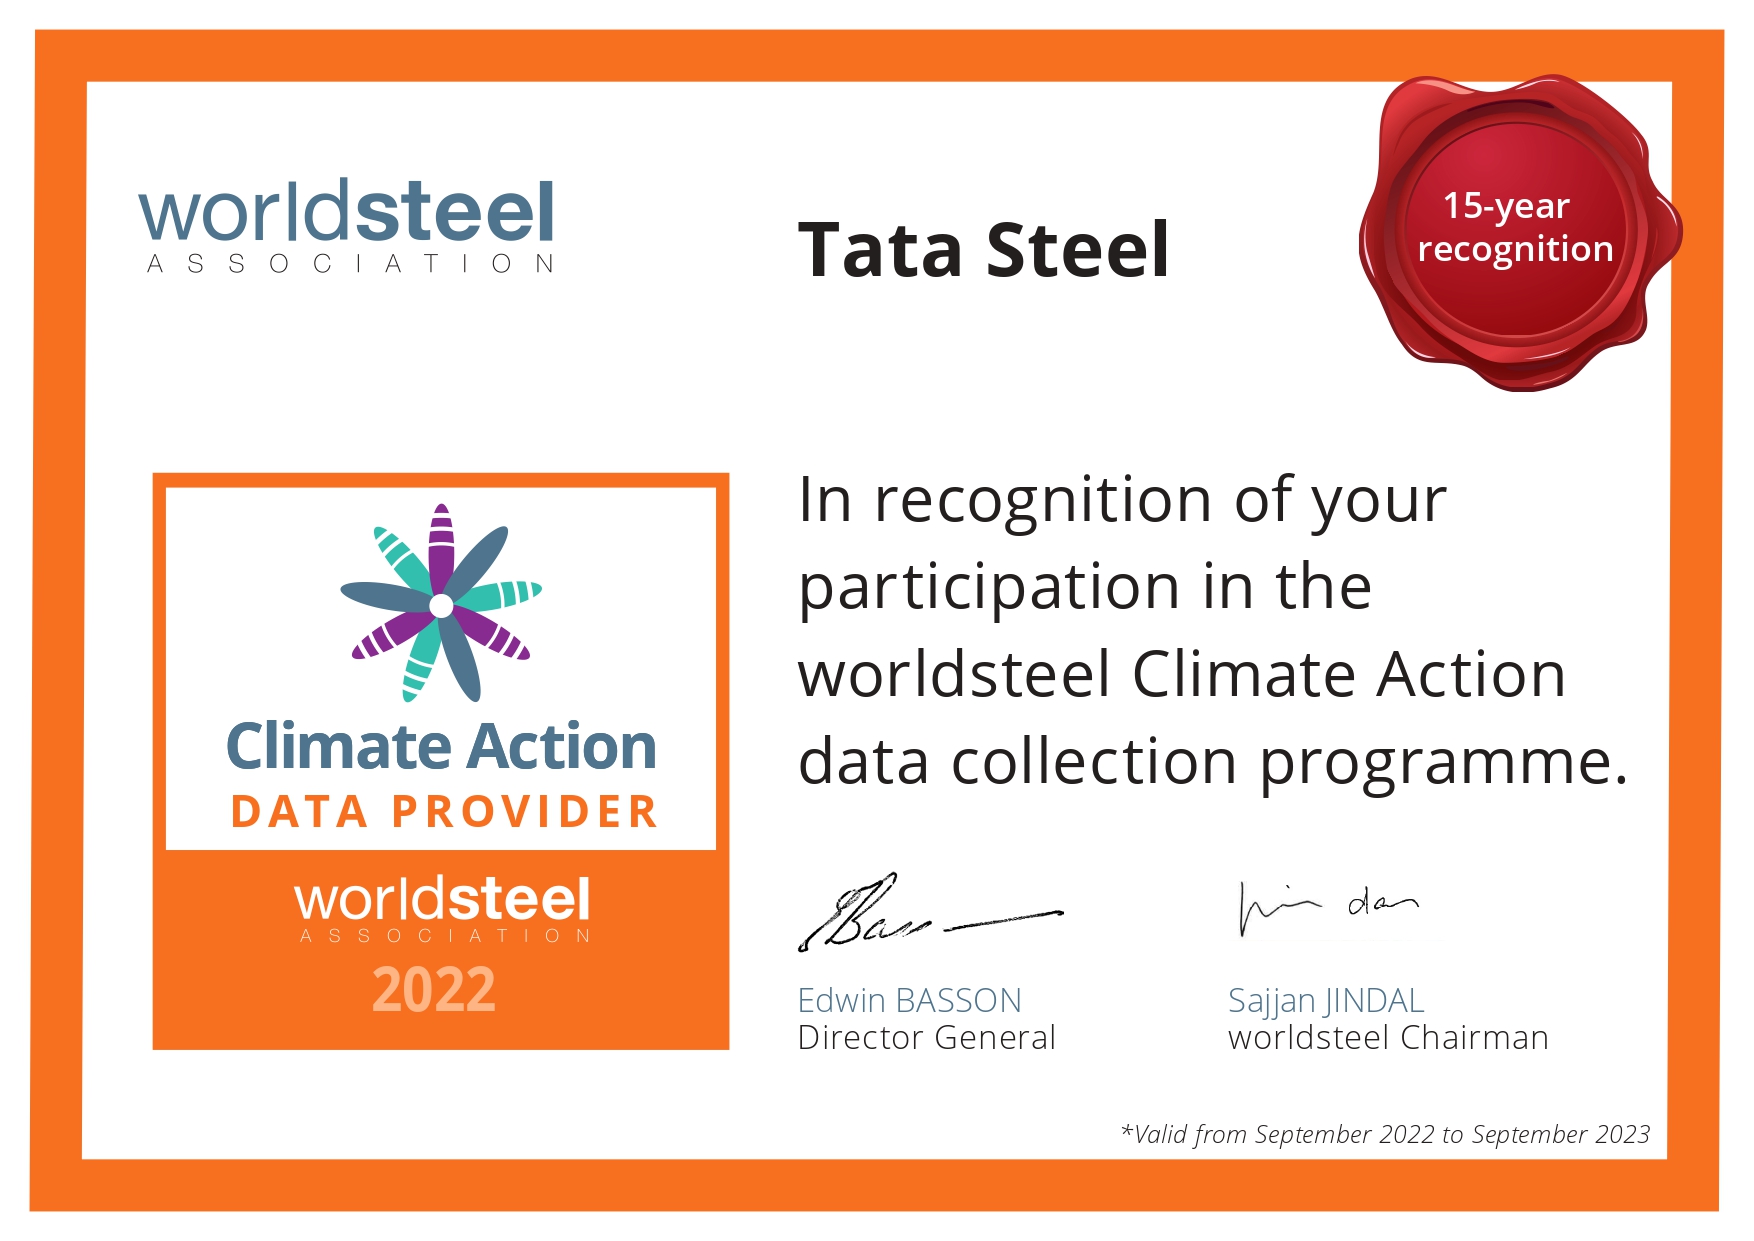 Climate action data provider